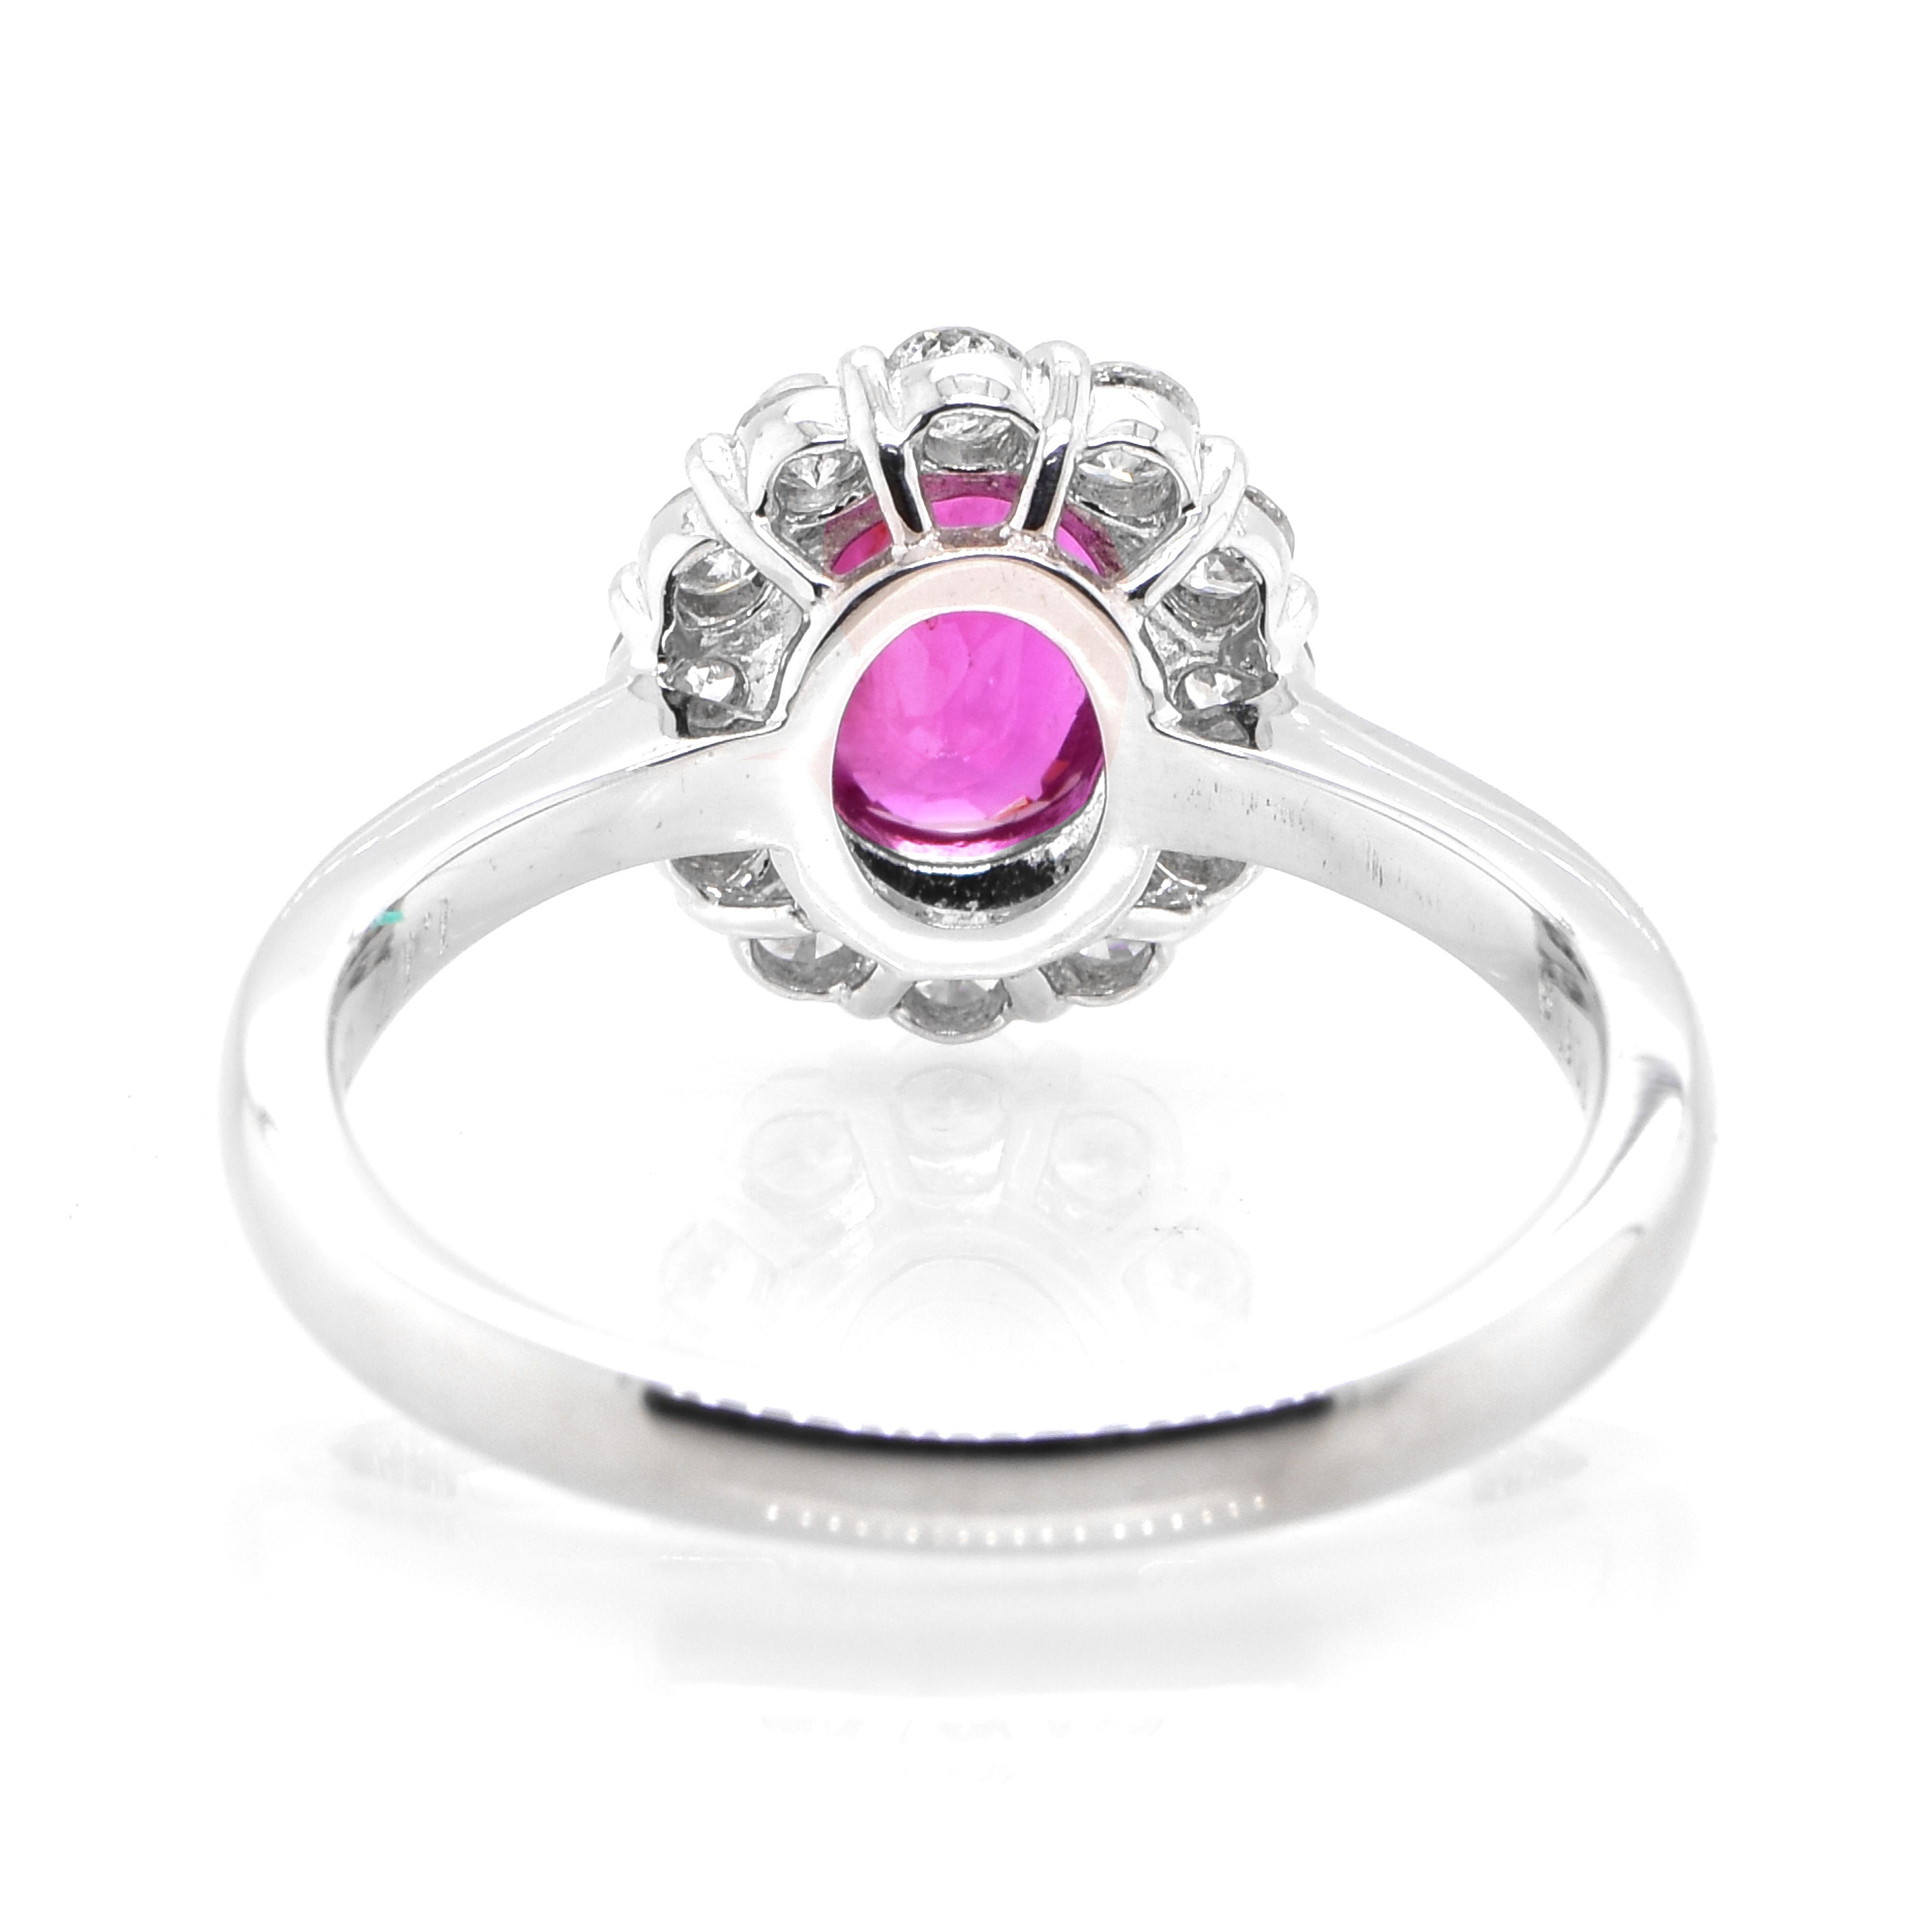 Women's AIGS Certified 1.17 Carat Untreated Ruby and Diamond Ring Made in Platinum For Sale